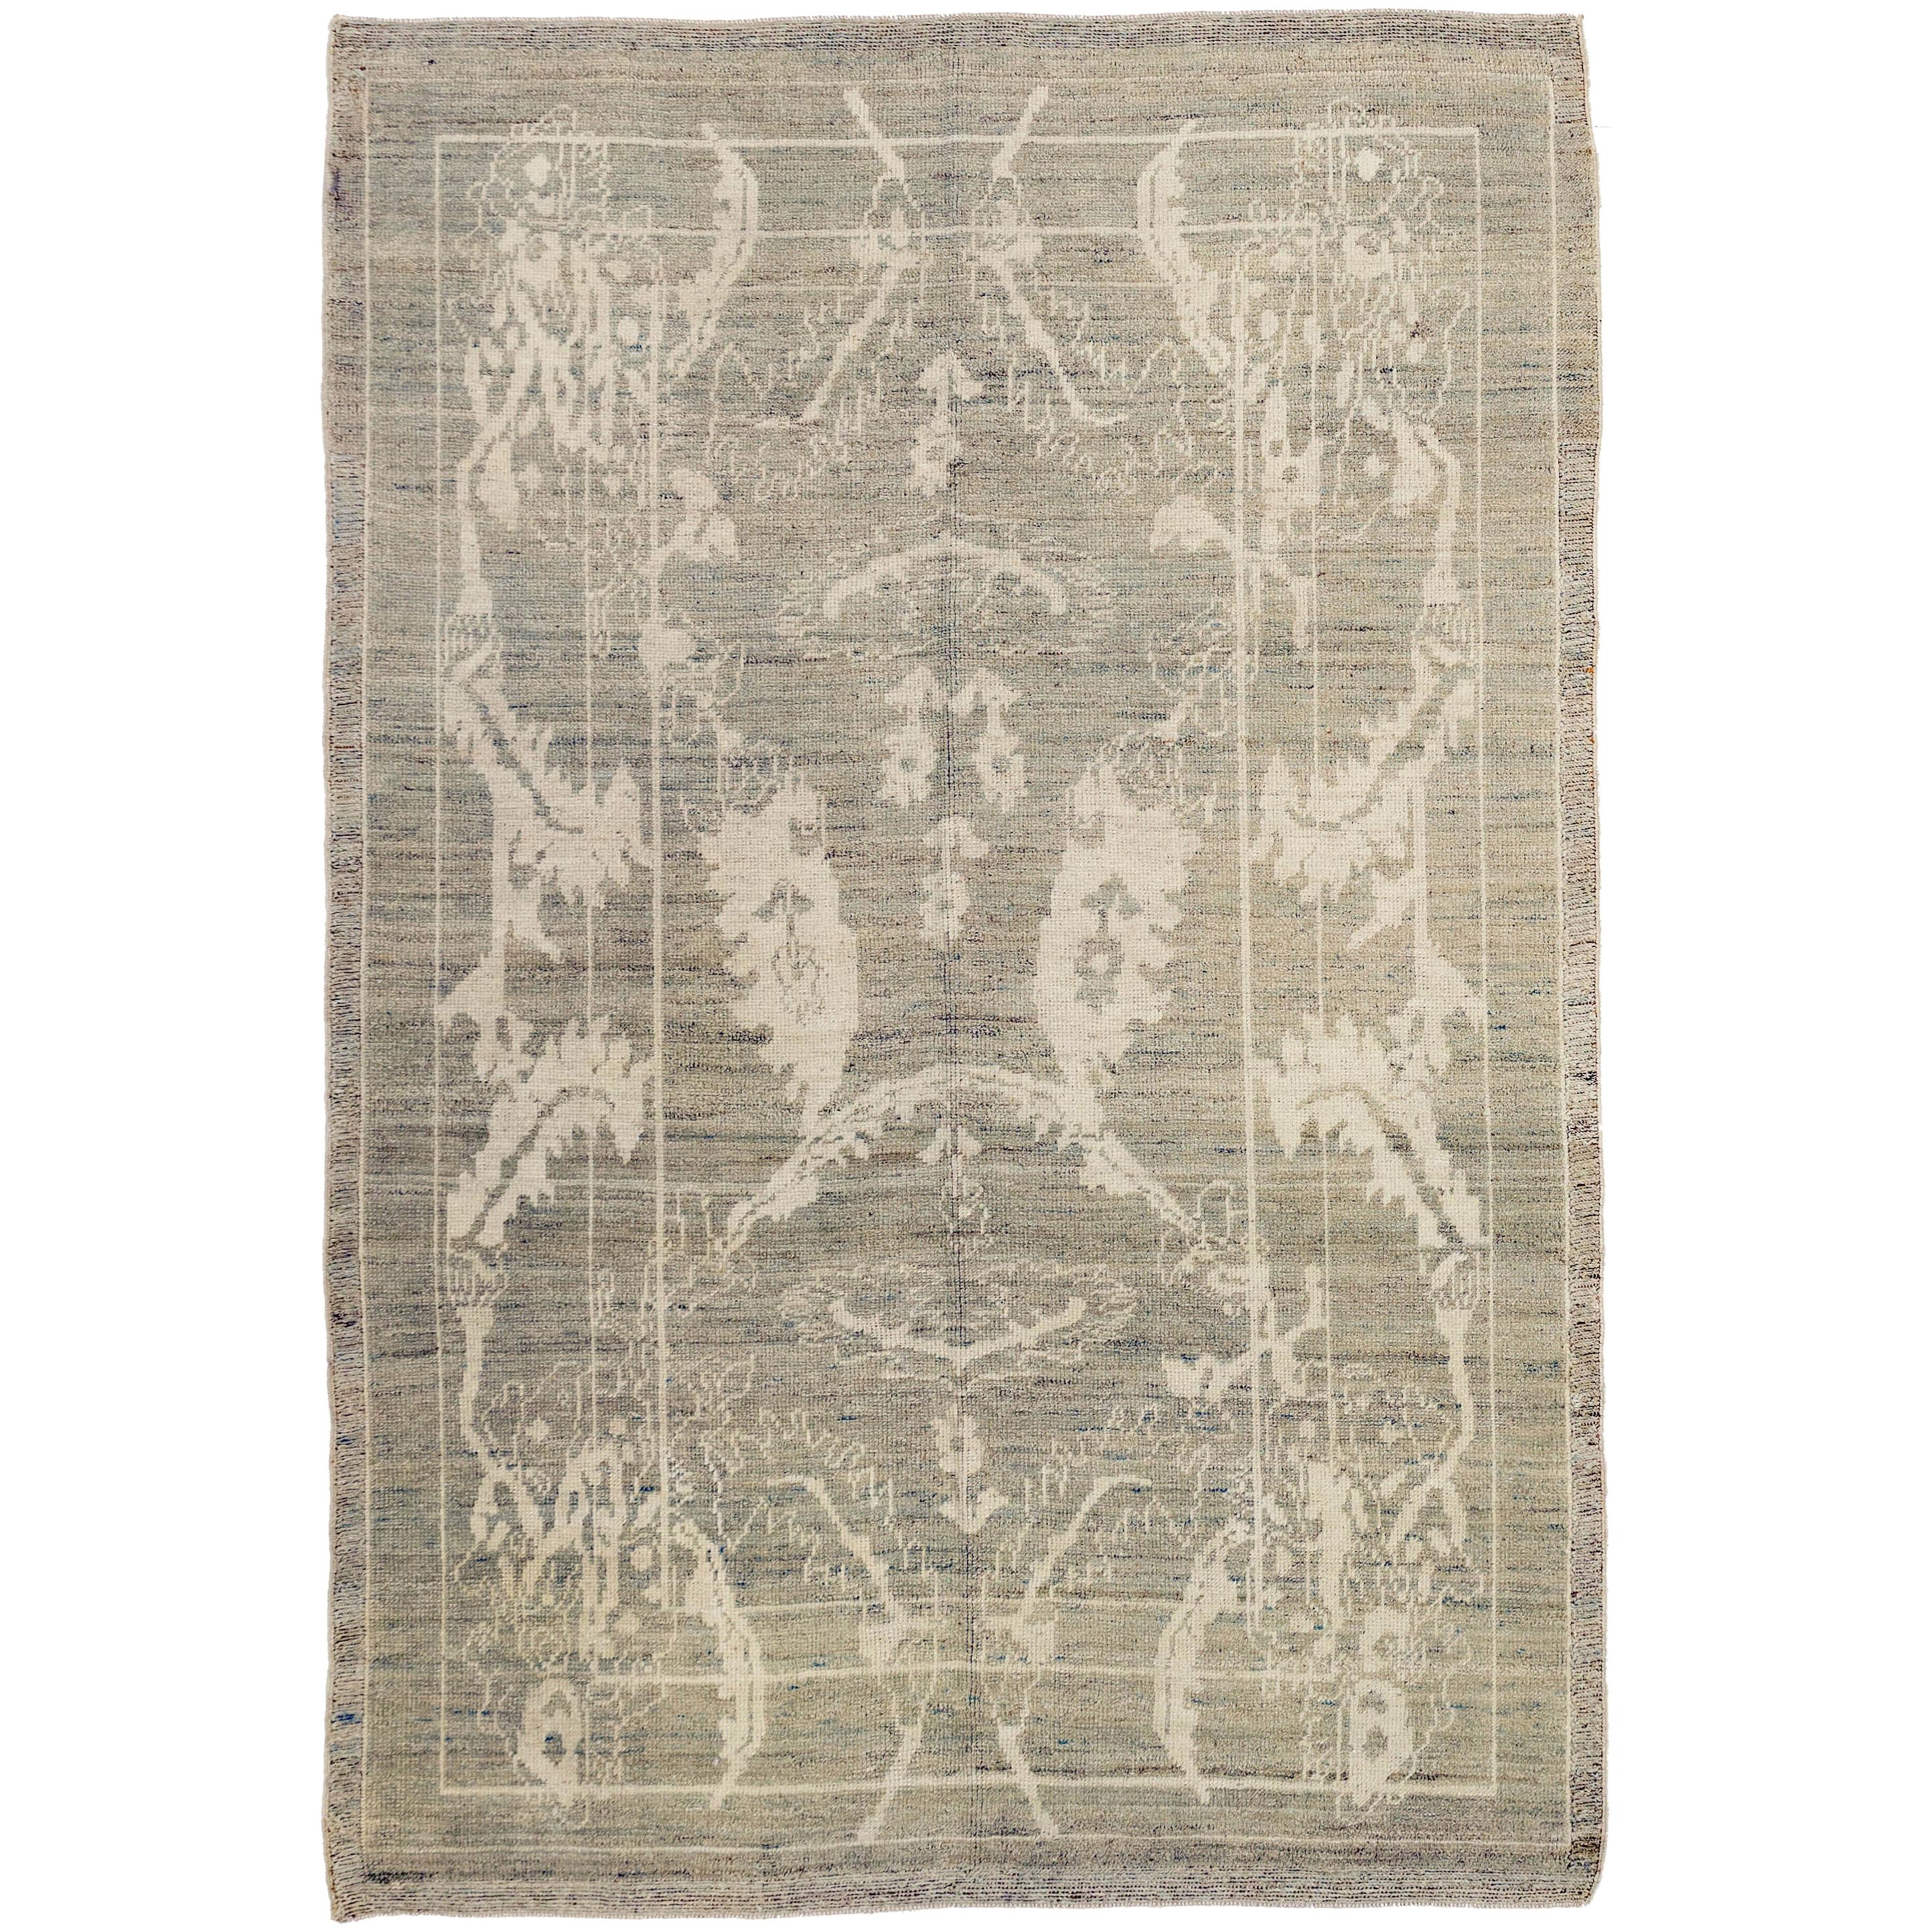 New Turkish Oushak Rug with Ivory and Gray Botanical Details on Beige Field For Sale